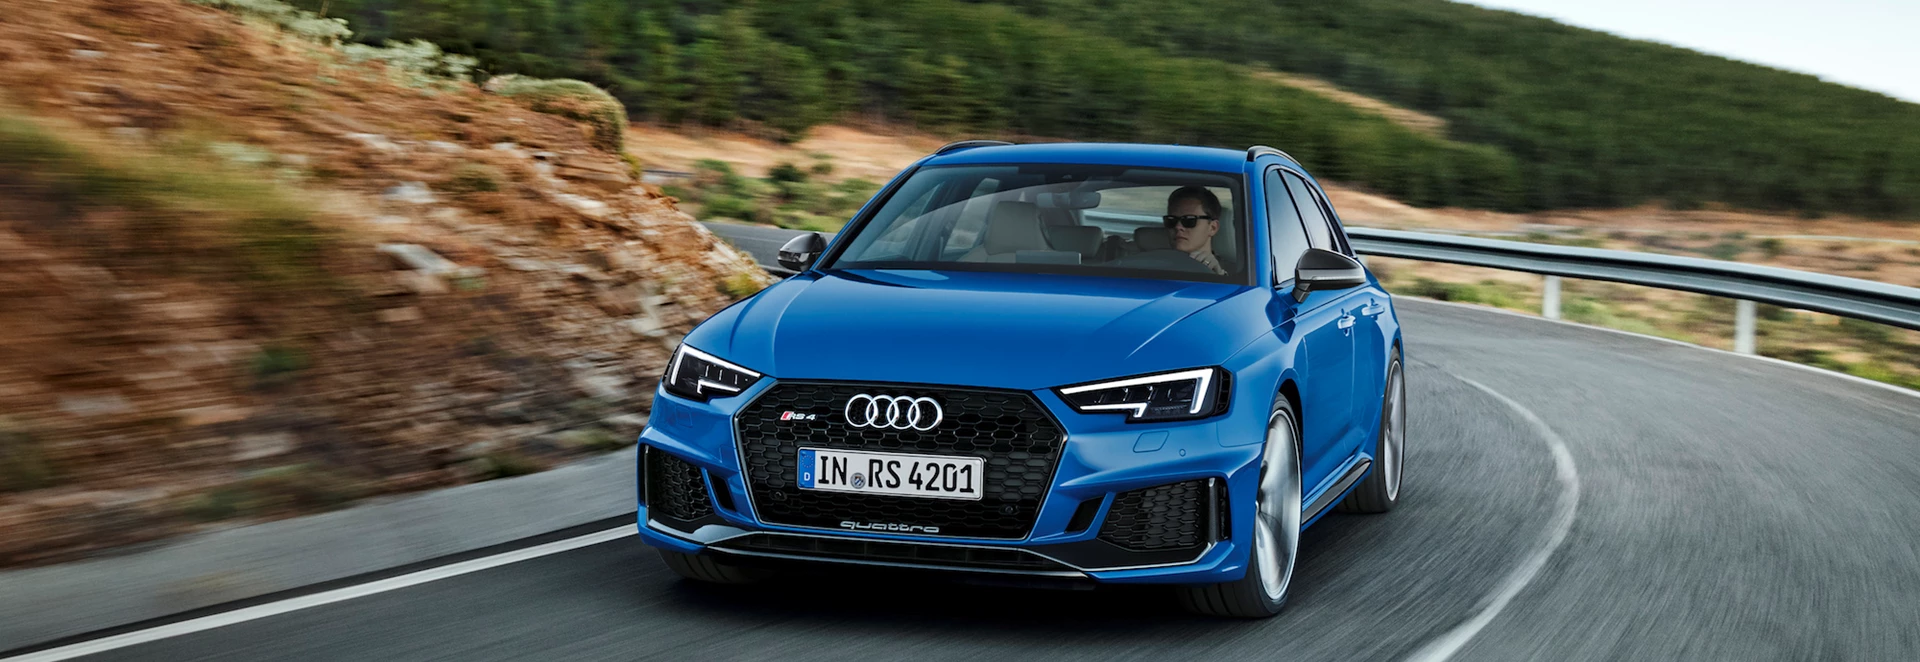 2018 Audi RS4 Avant is now on sale in the UK 